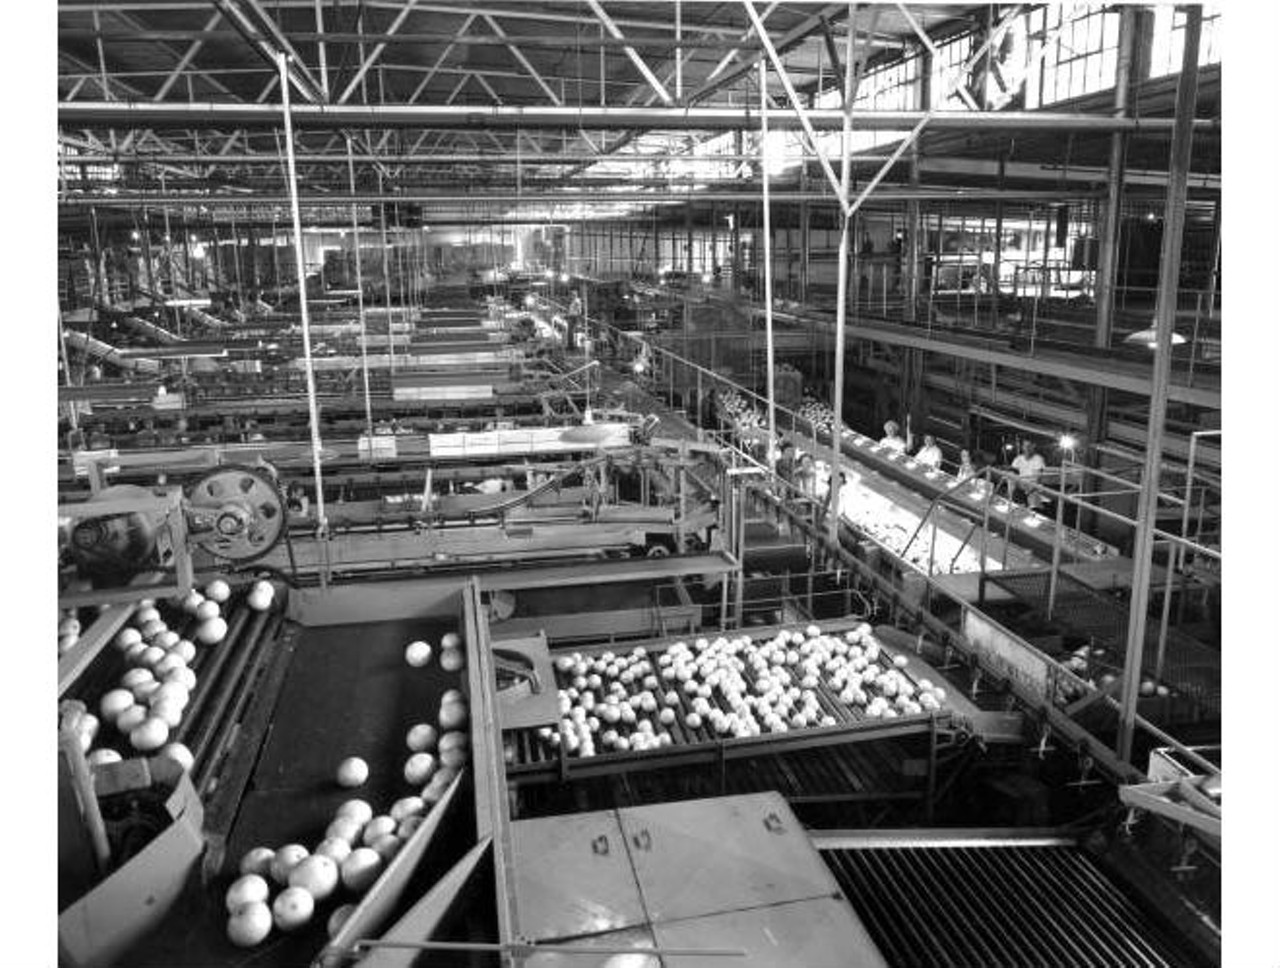 Interior view of Minute Maid processing plant